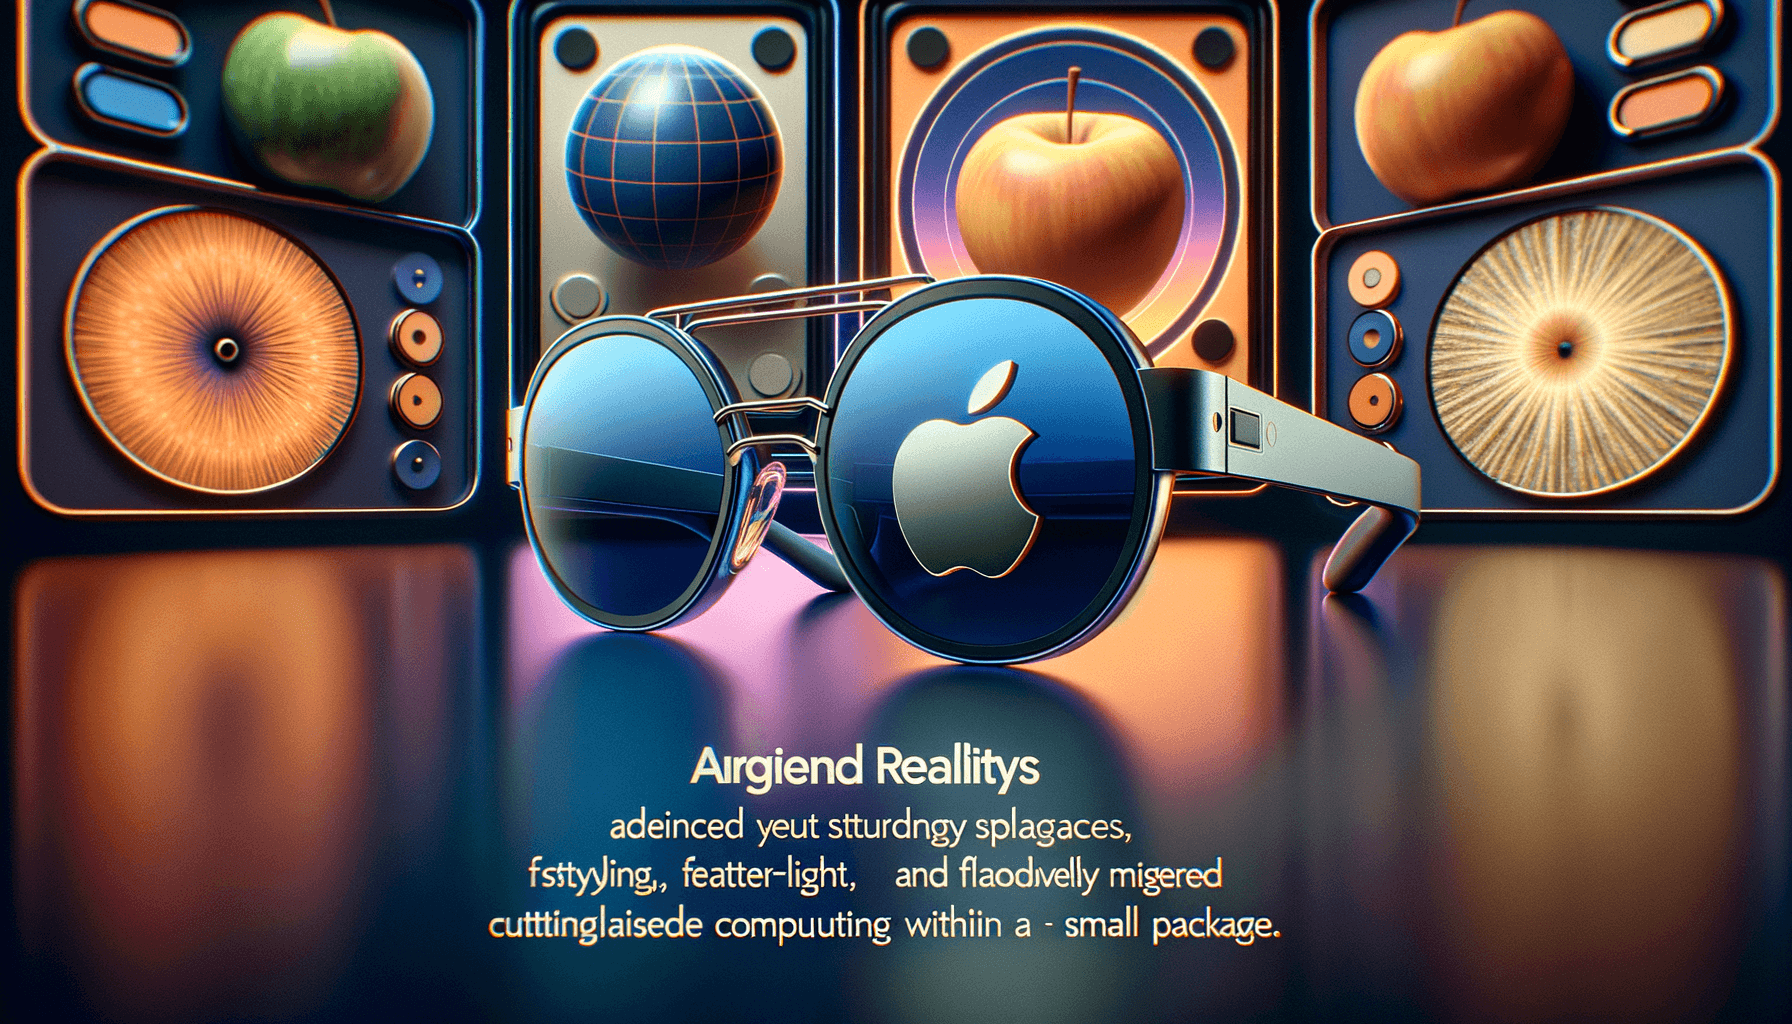 "Introducing the chic Apple Vision Pro AR glasses: Where cutting-edge technology meets fashion-forward design, revolutionizing wearable tech with elegance and power."